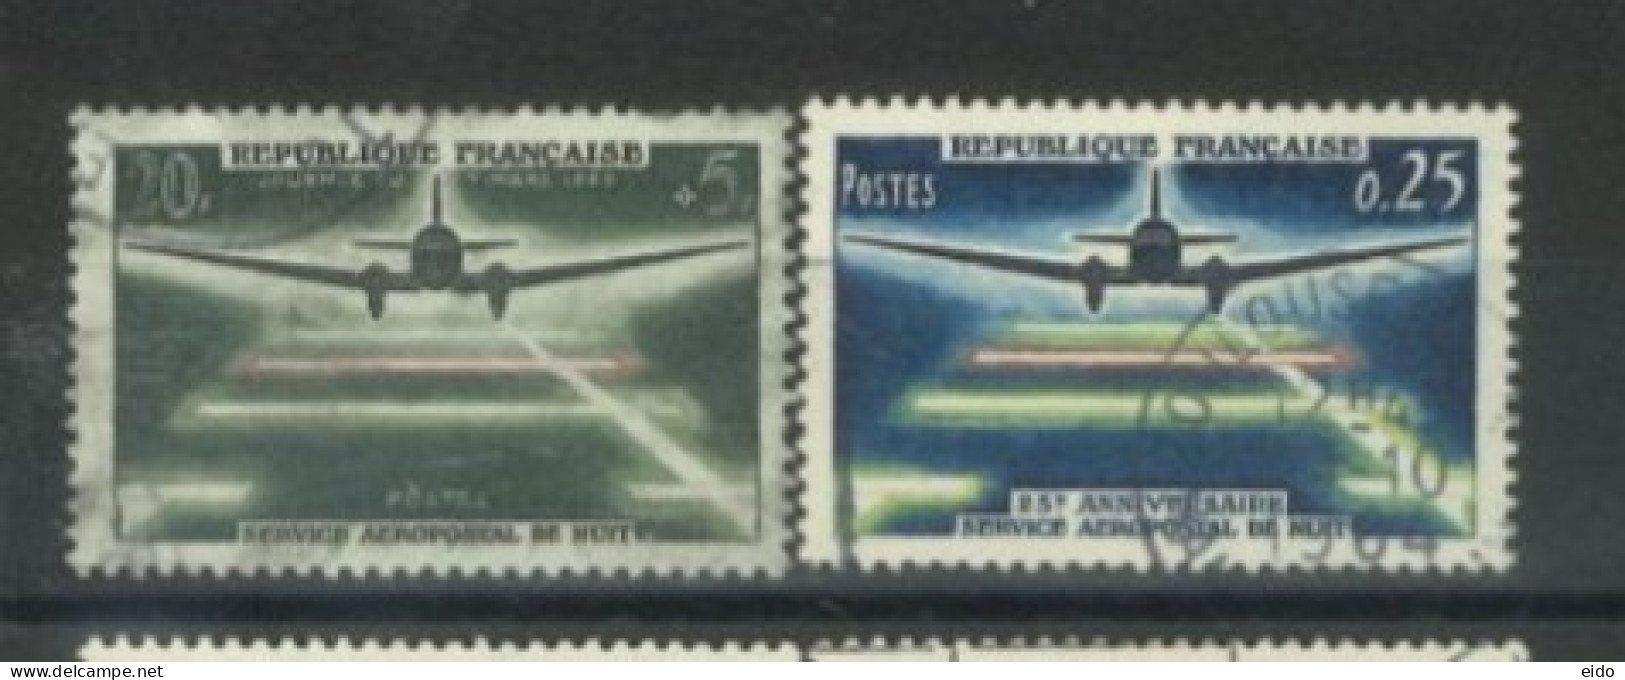 FRANCE - 1959. 64, POST DAY STAMPS SET OF 2, USED - Gebraucht